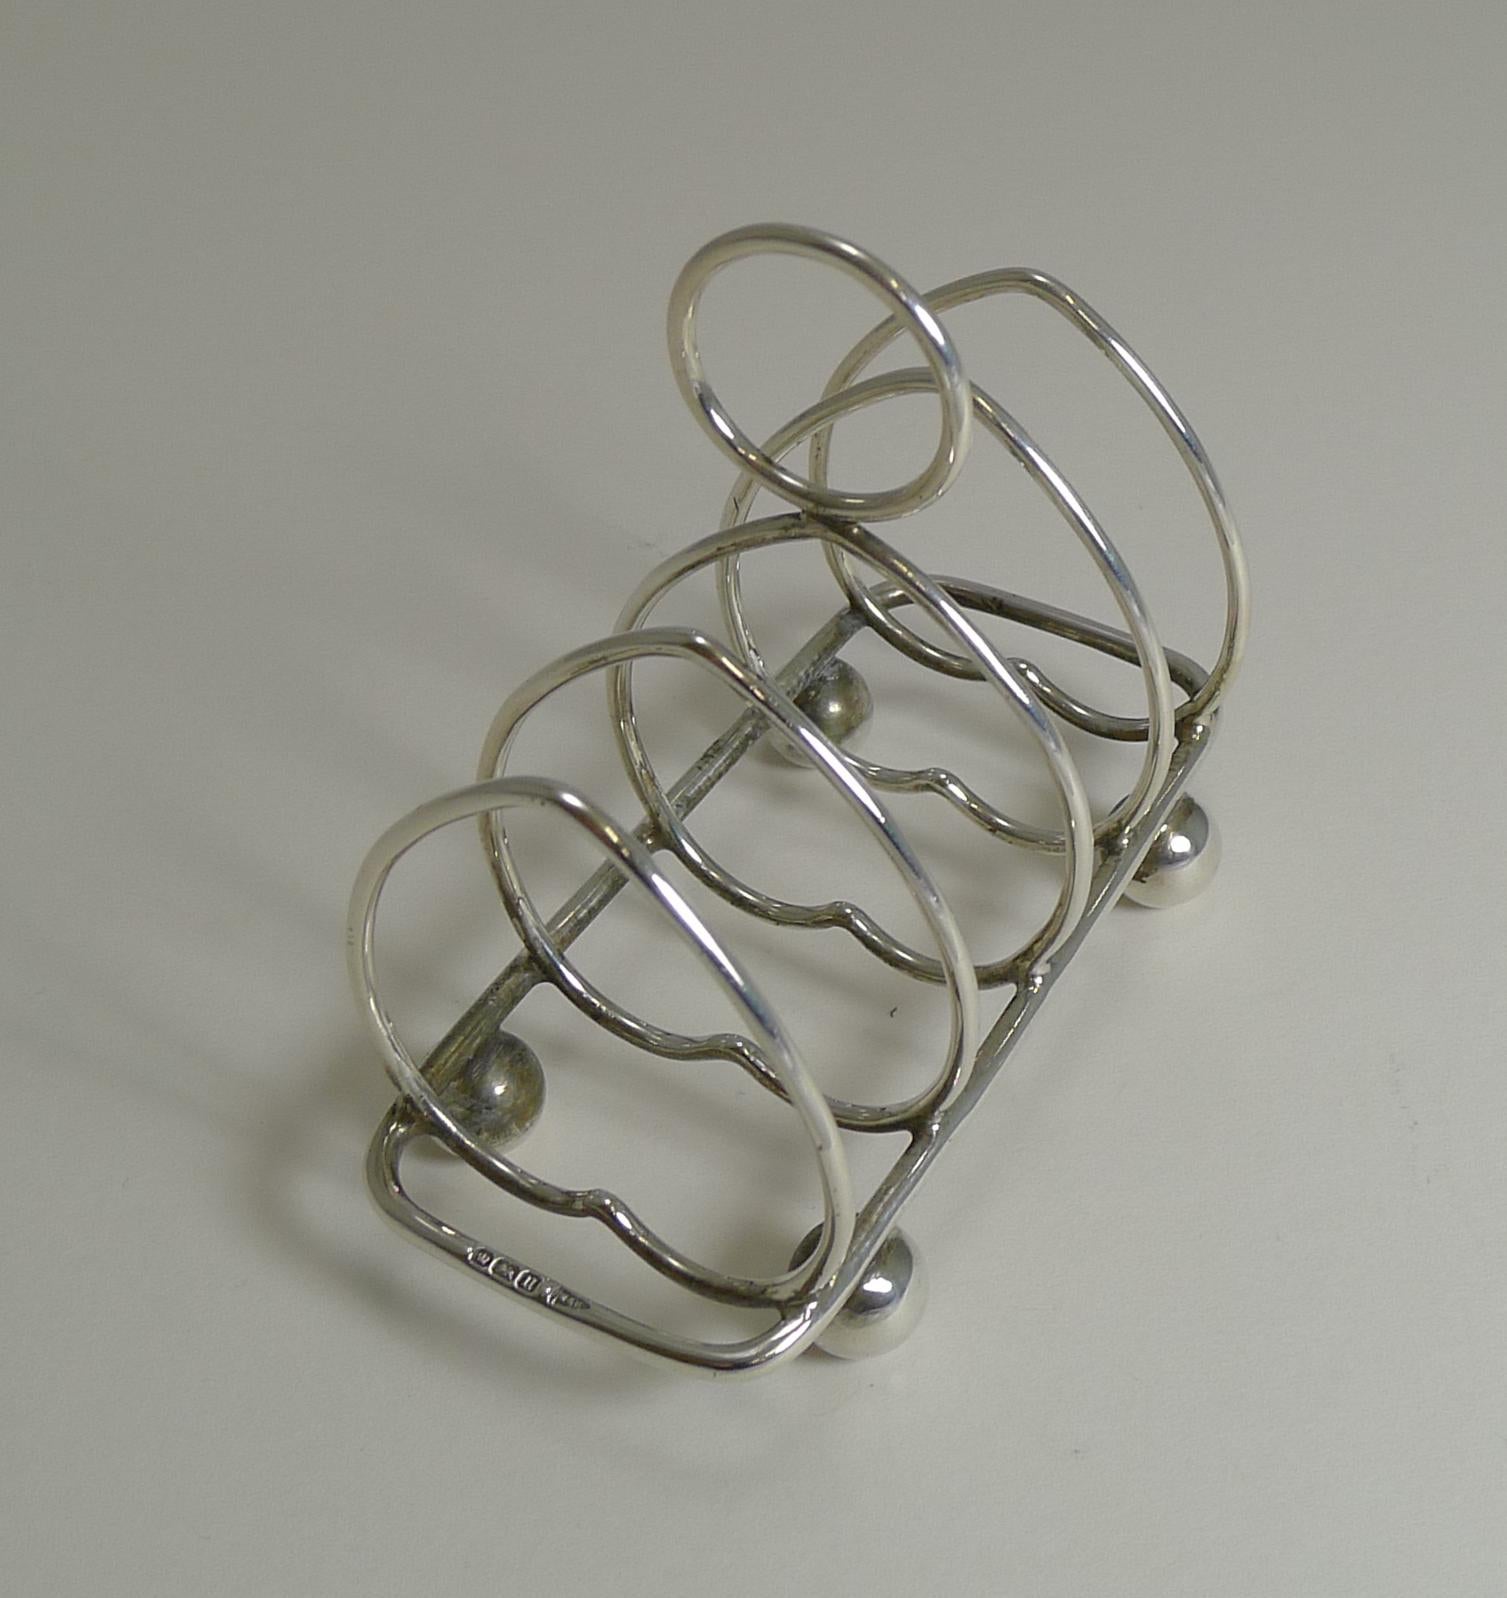 George IV Antique English Sterling Silver Heart Toast Rack, 1912 by Walker and Hall